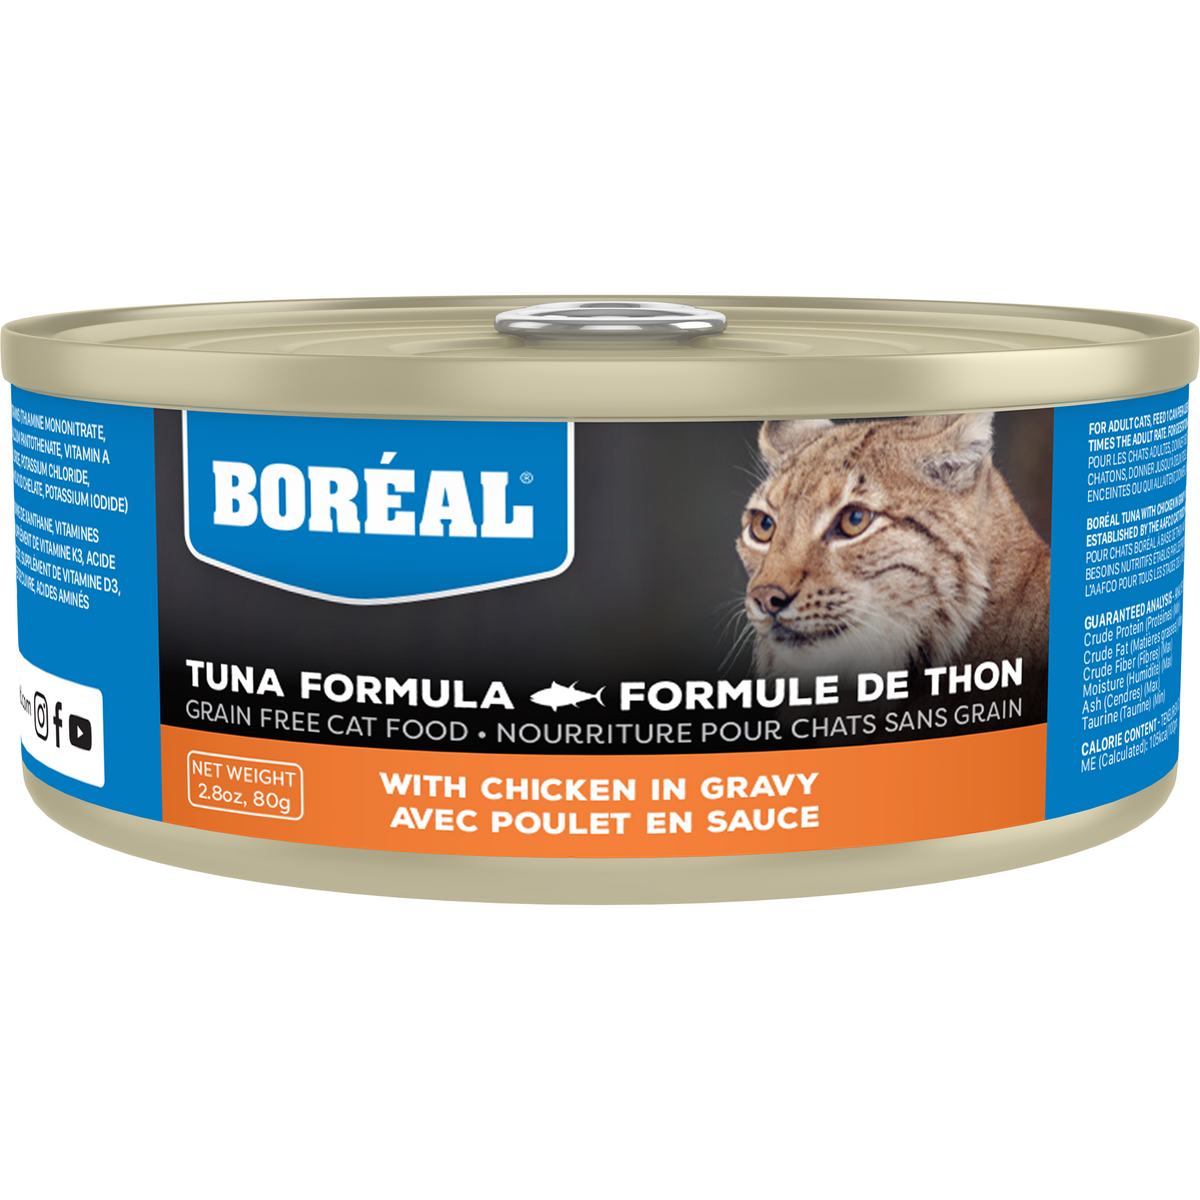 Boreal Tuna Formula - Red Tuna with Chicken in Gravy - Canned Cat Food